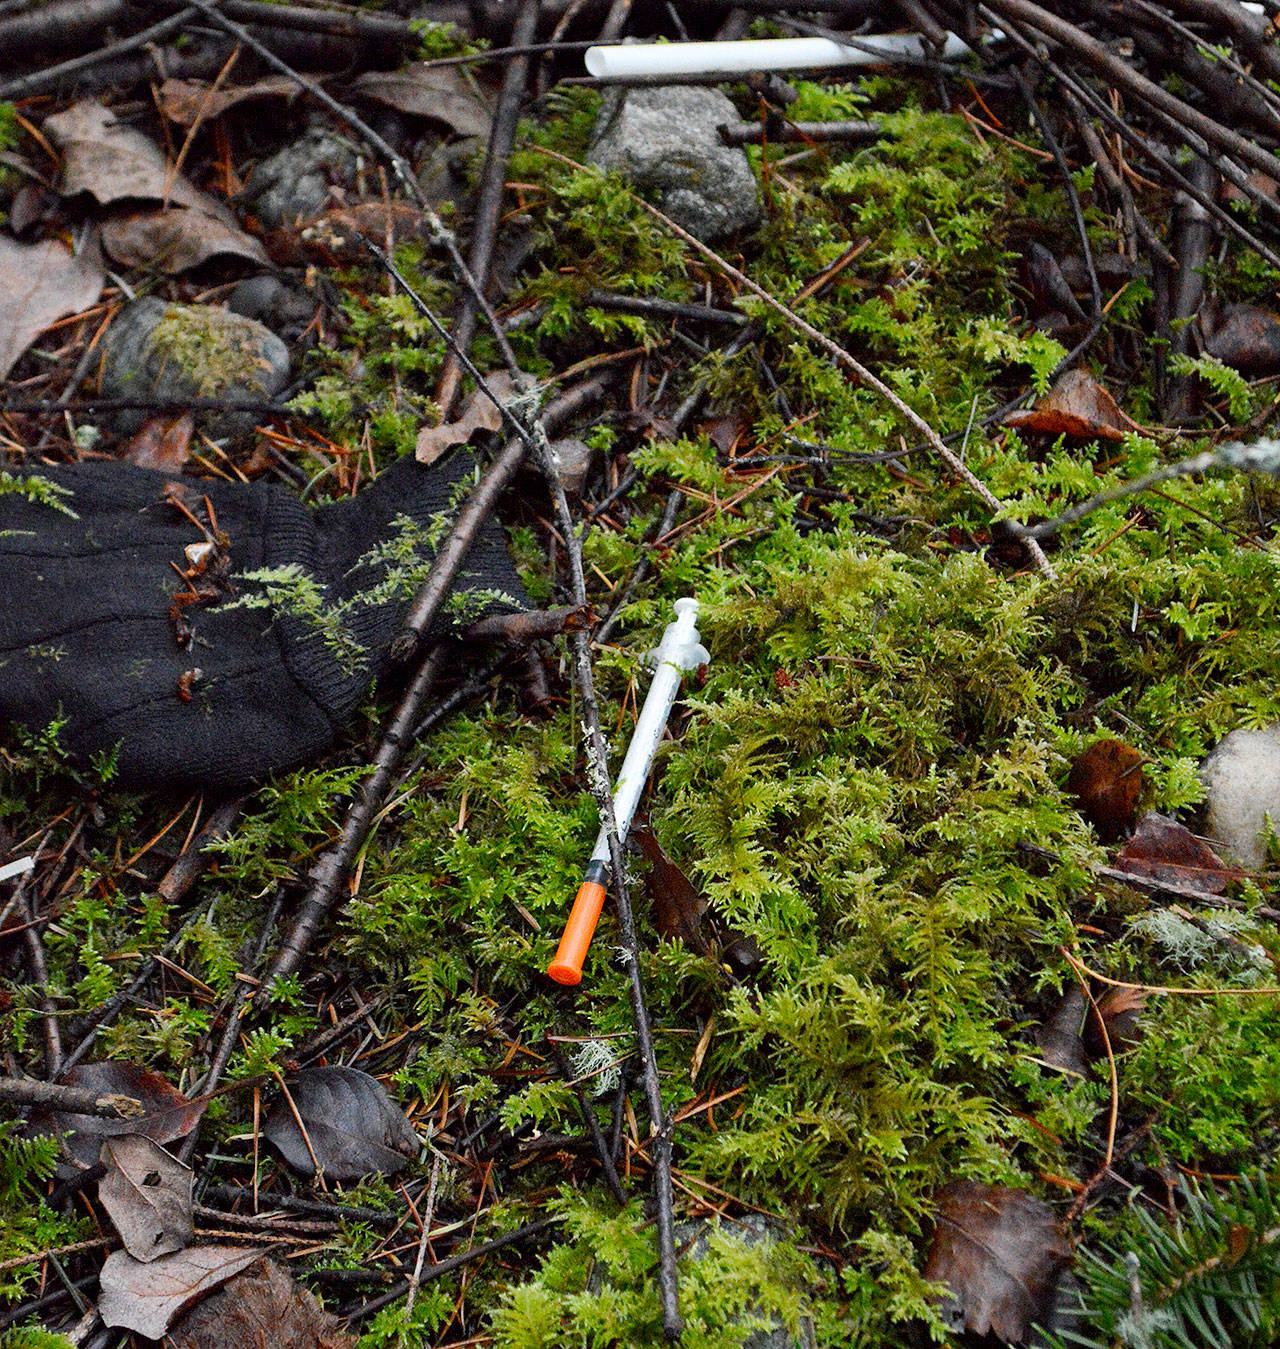 A hypodermic needle was found at a homeless camp near Oak Harbor. (Photo by Laura Guido / Whidbey News group)